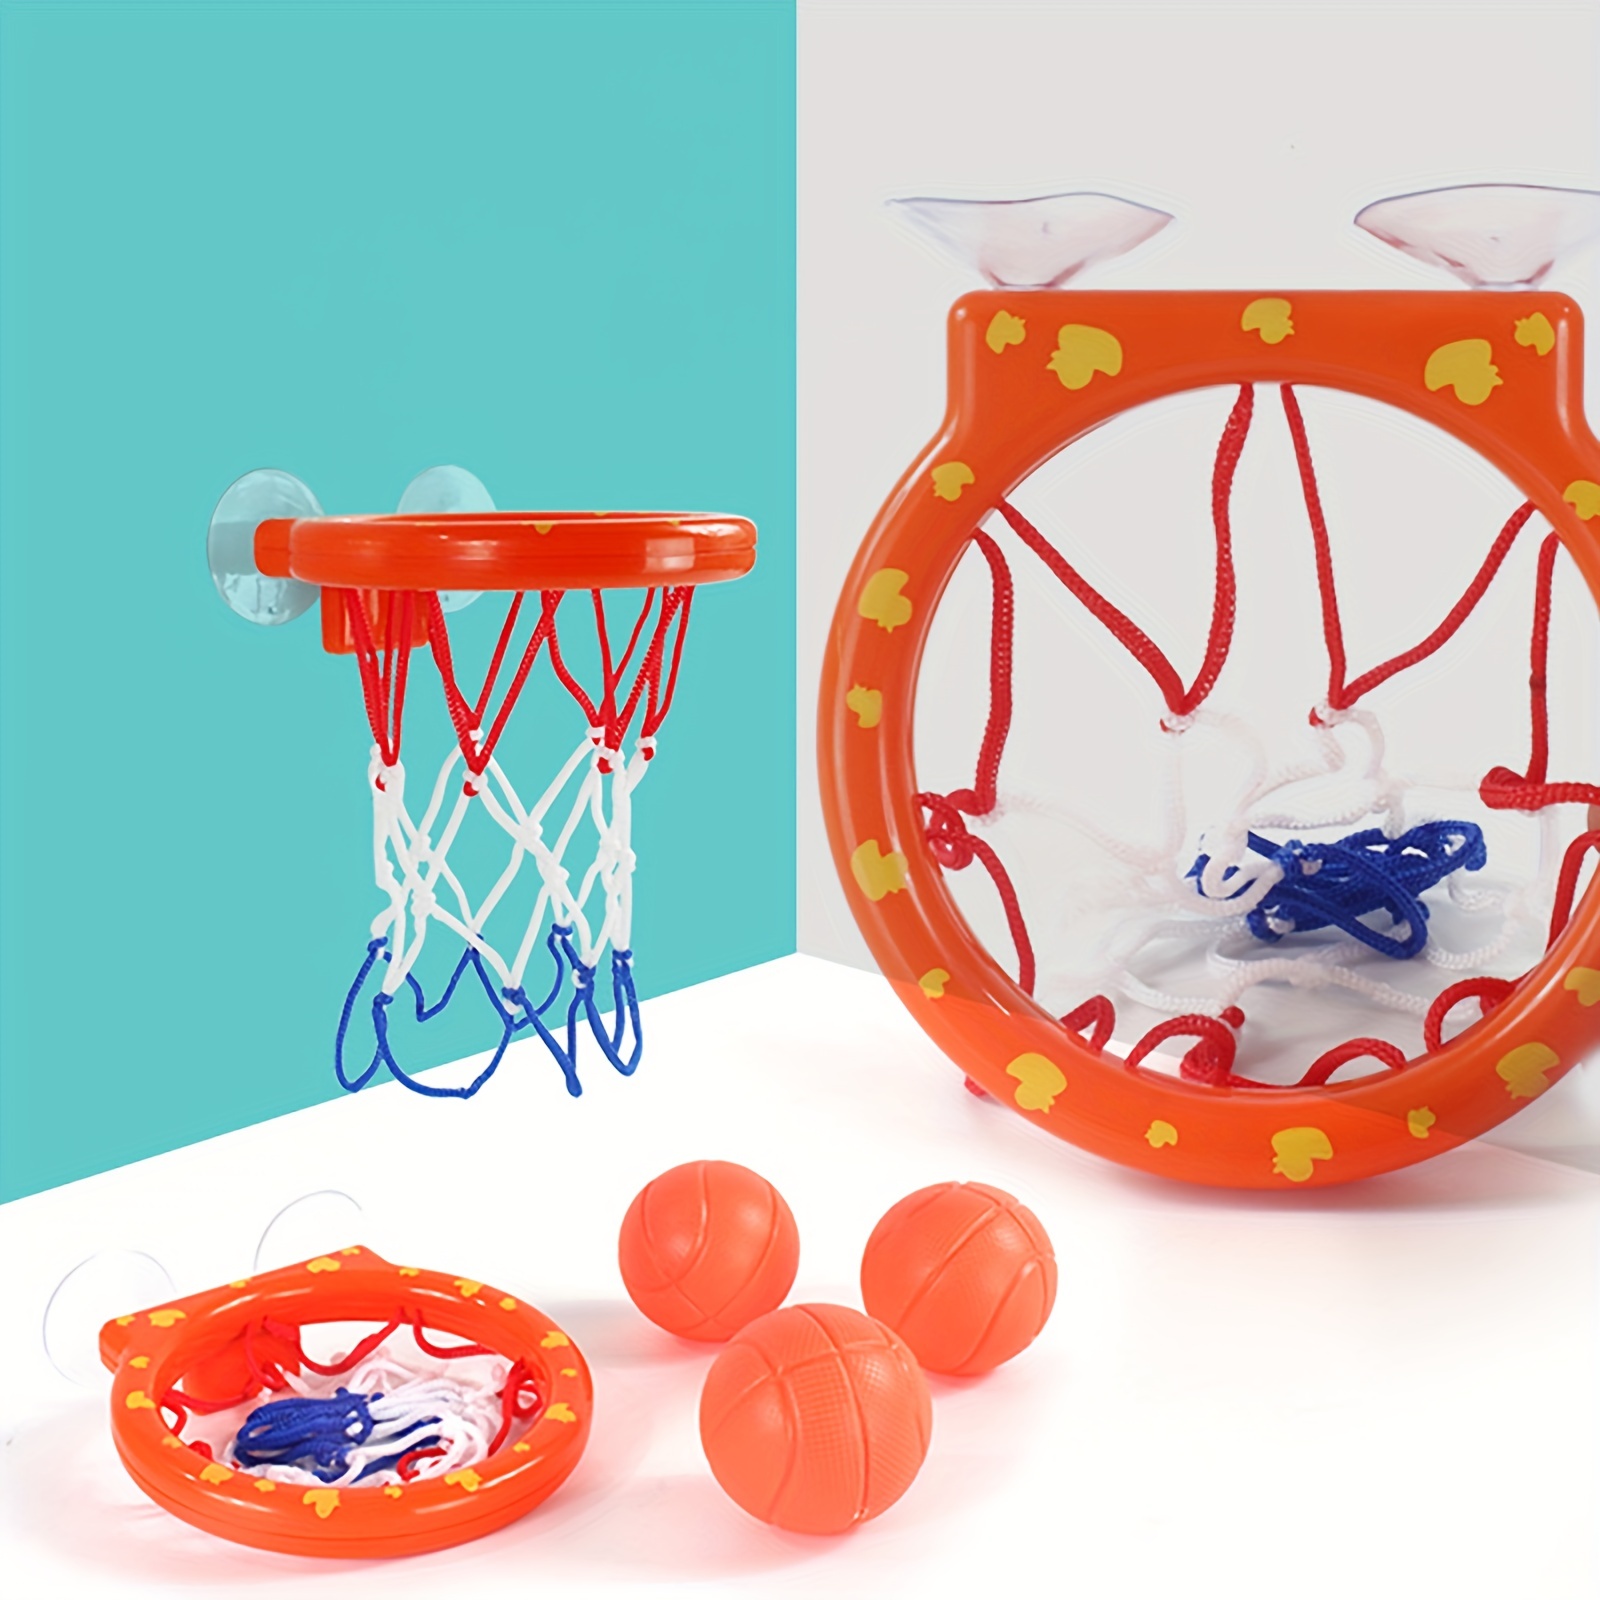 Bath Toys - Bathtub Basketball Hoop for Kids Toddlers - Bath Toys Shower  Toys for Kids Ages 4-8,Suction Cup Basketball Hoop & 3 No Hole Balls Set  for Boys Girls…